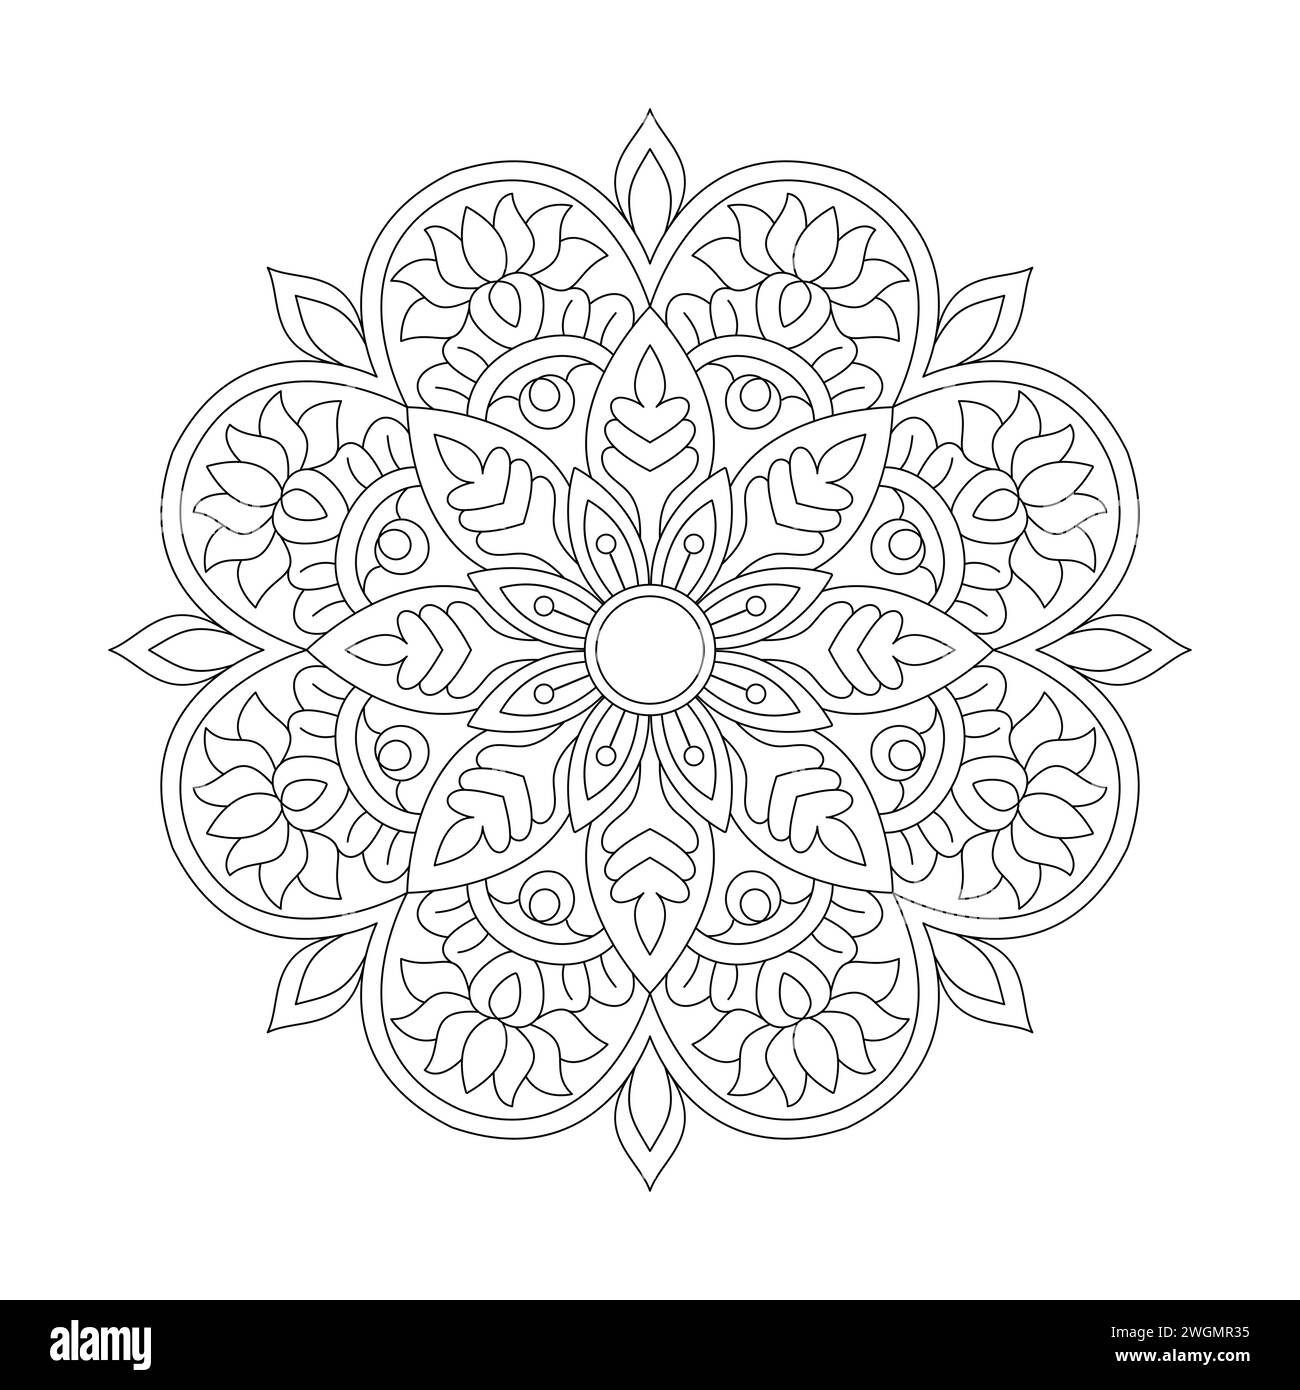 Peaceful Relaxation Mandala Coloring Book Page for kdp Book Interior. Peaceful Petals, Ability to Relax, Brain Experiences, Harmonious Haven, Peaceful Stock Vector